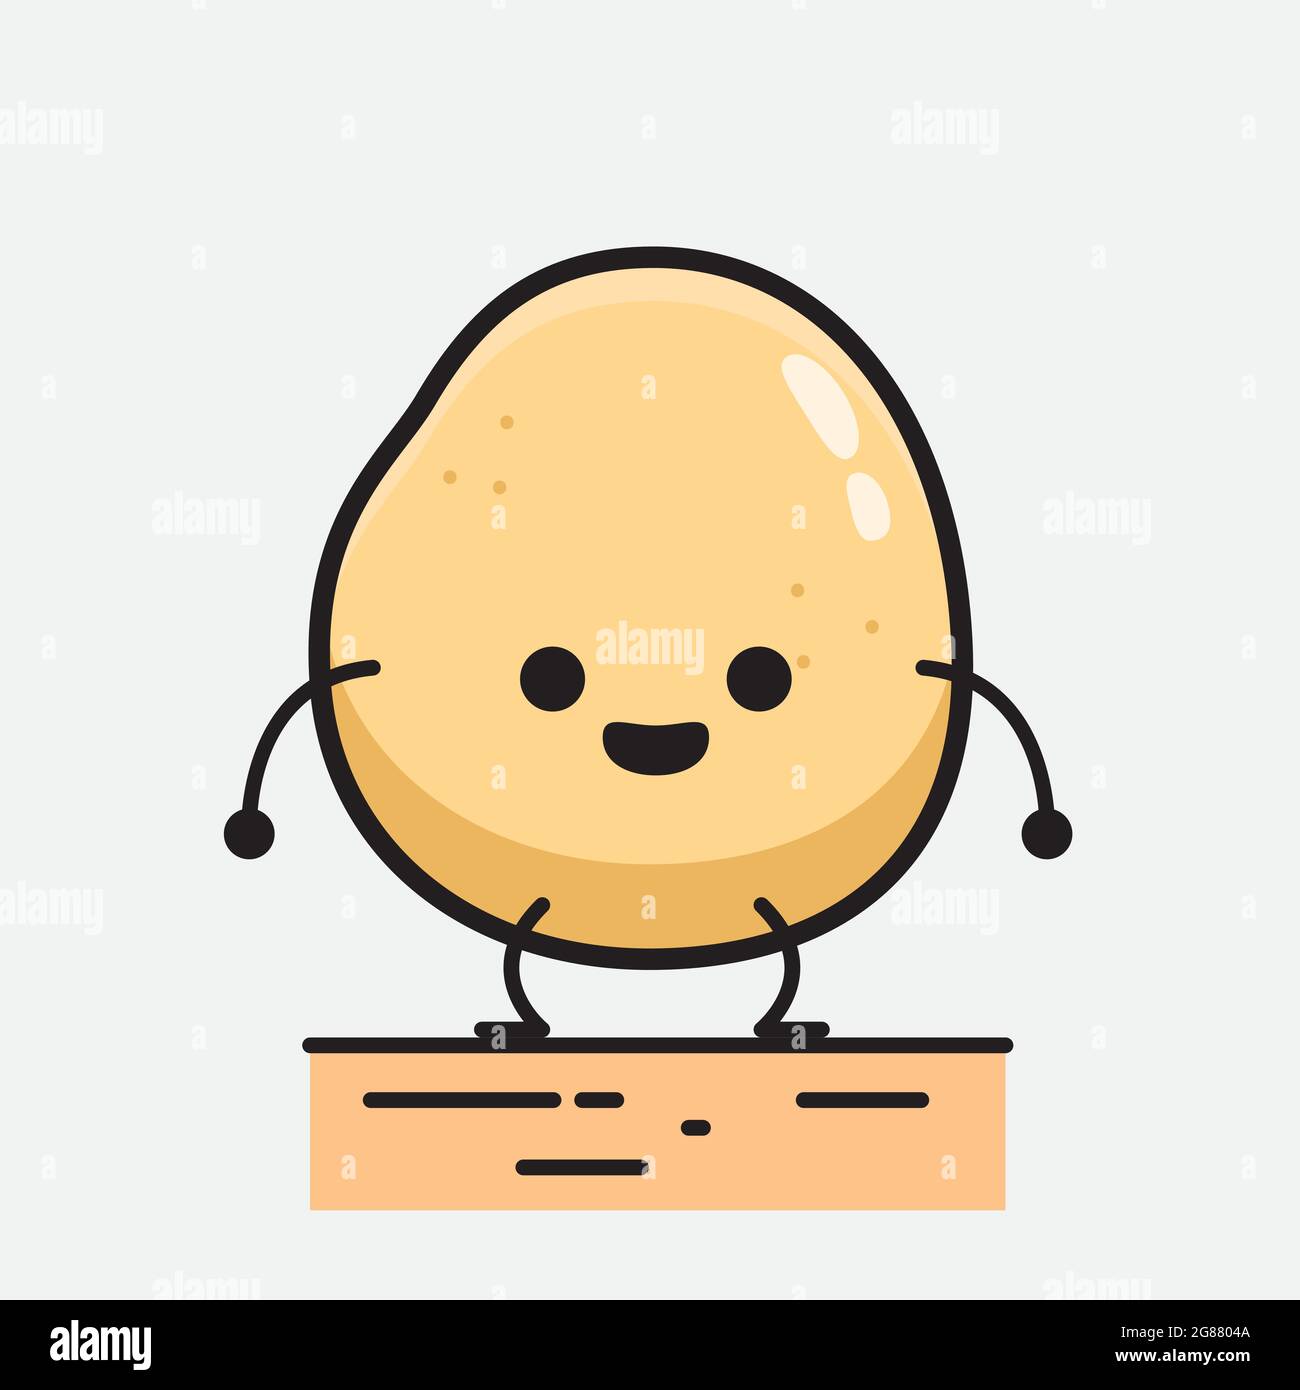 Vector Funny Cartoon Cute Tiny Potato Character Isolated on White  Background. My Name is Potato Vector Concept Stock Vector - Illustration of  kitchen, isolated: 111962312